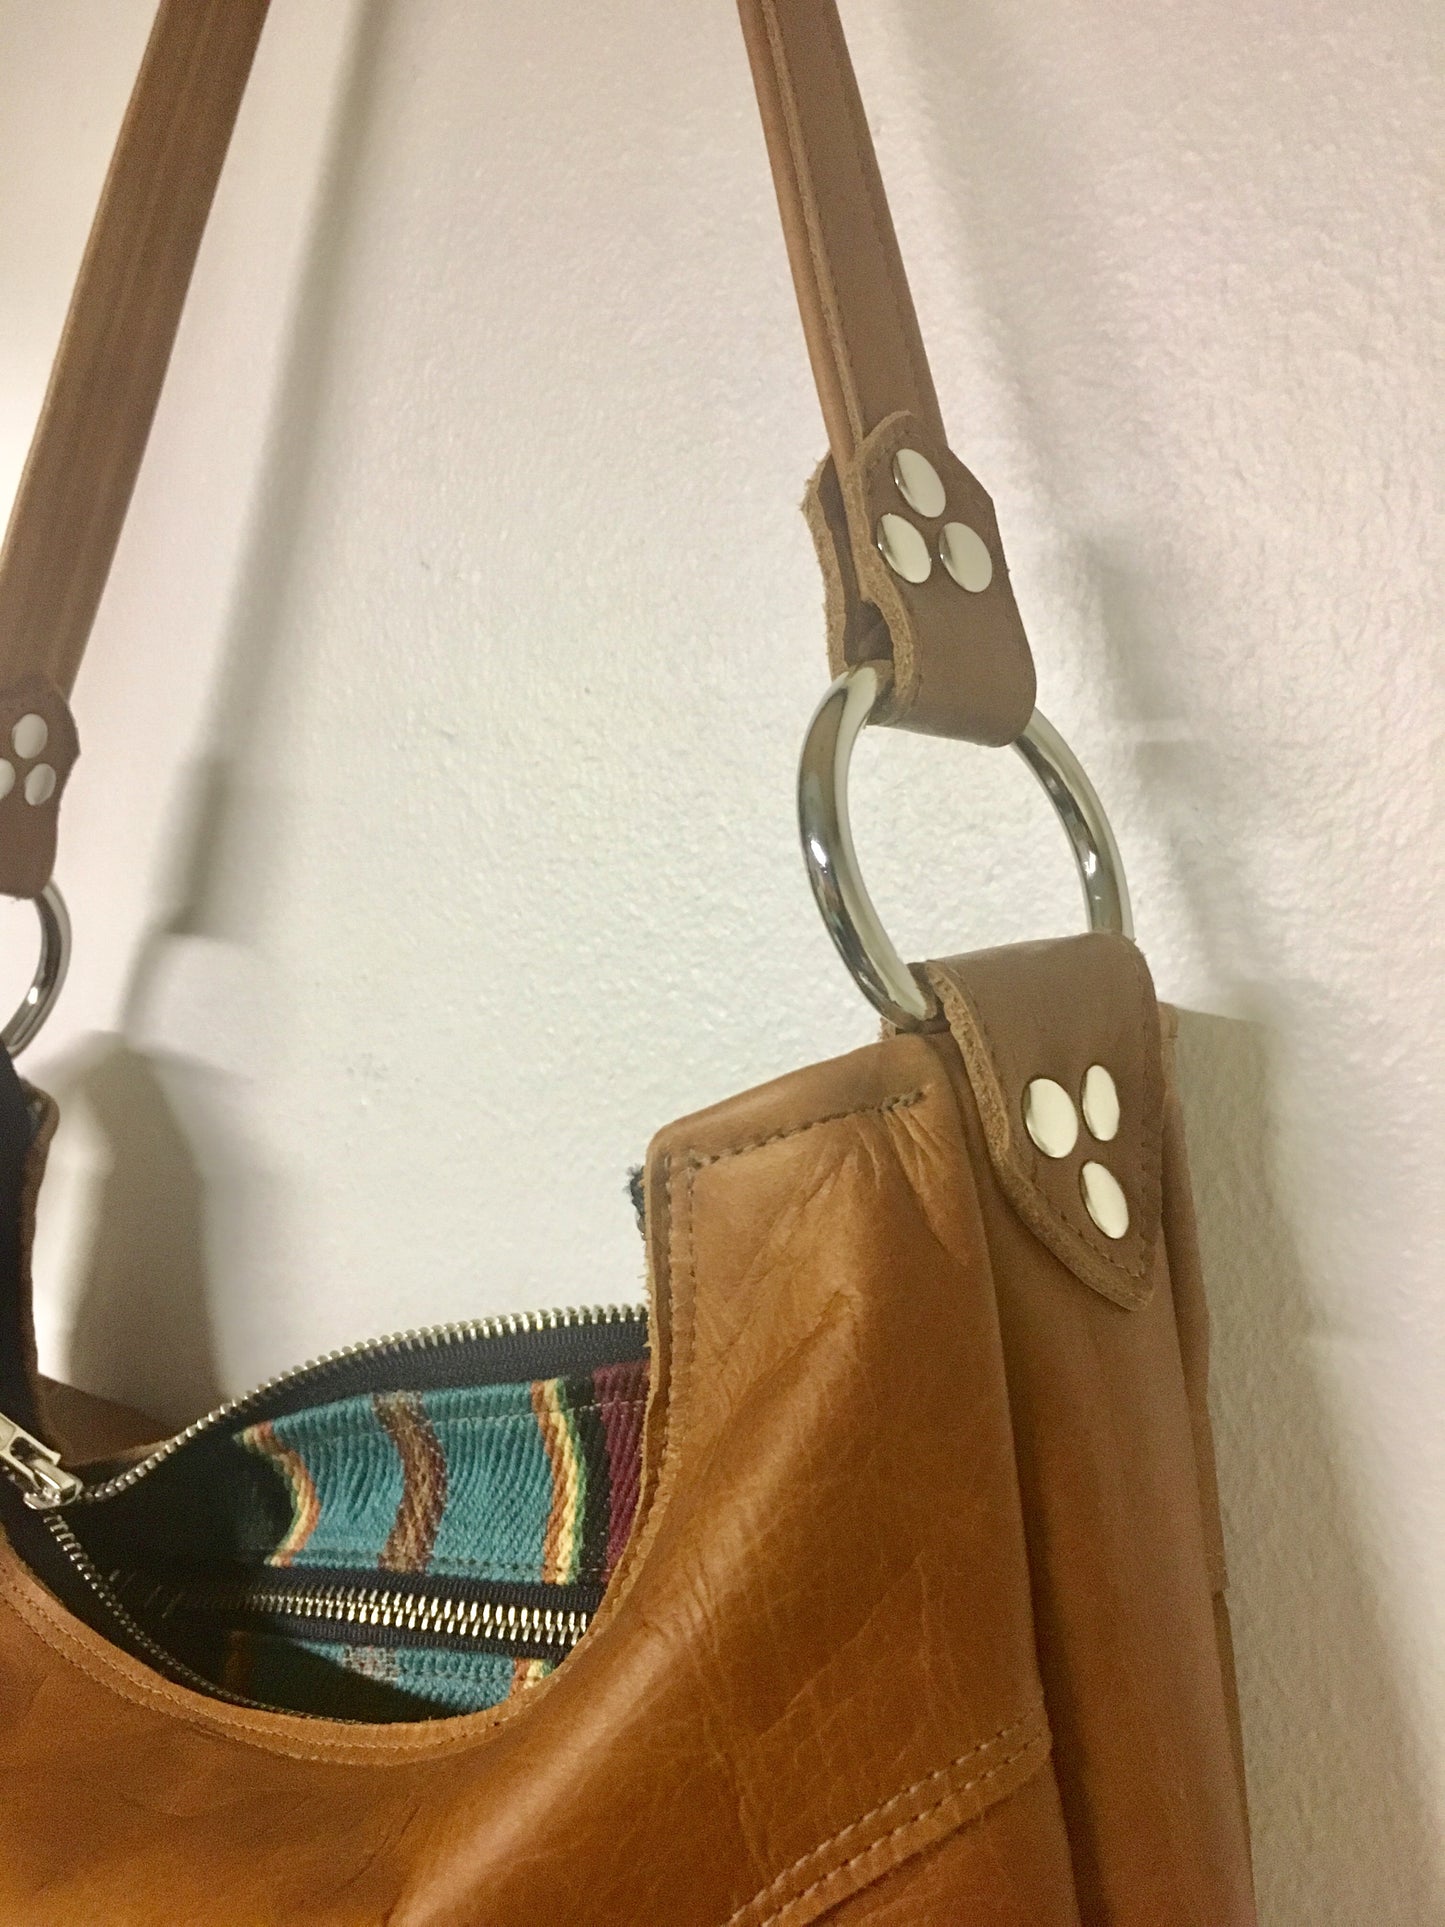 Death Valley hobo shoulder bag in Cognac leather and turquoise serapae print lining with zipper closure and vinyl pull, inside open divided pocket and one zipper pocket with 22” shoulder strap. Signature J.T.Christensen Designs Label inside.